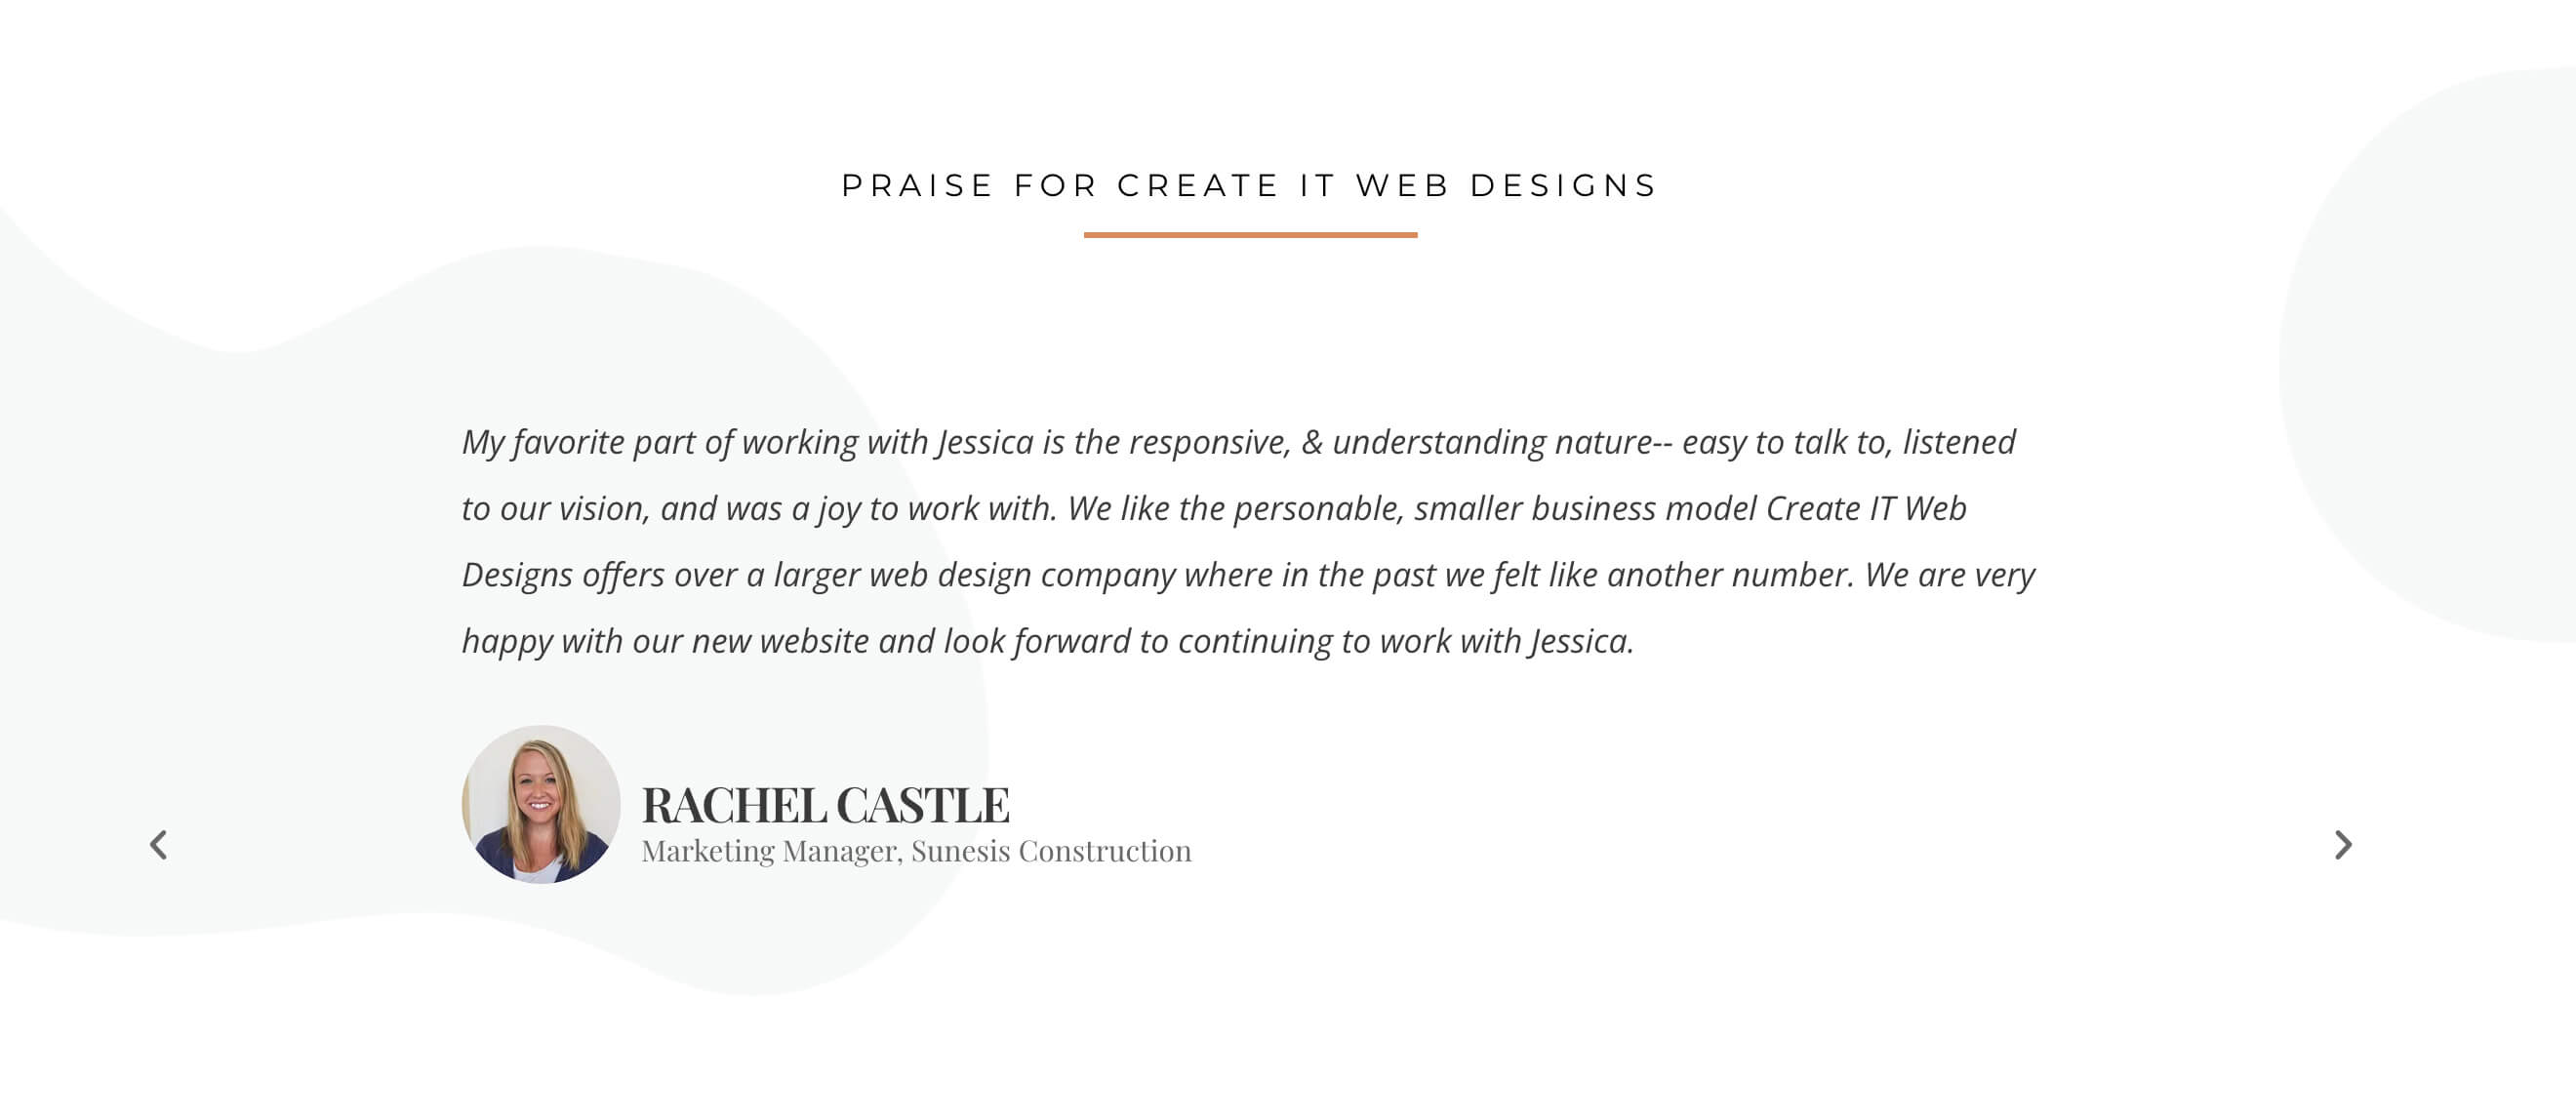 Ways to personalize your website - customer testimonials